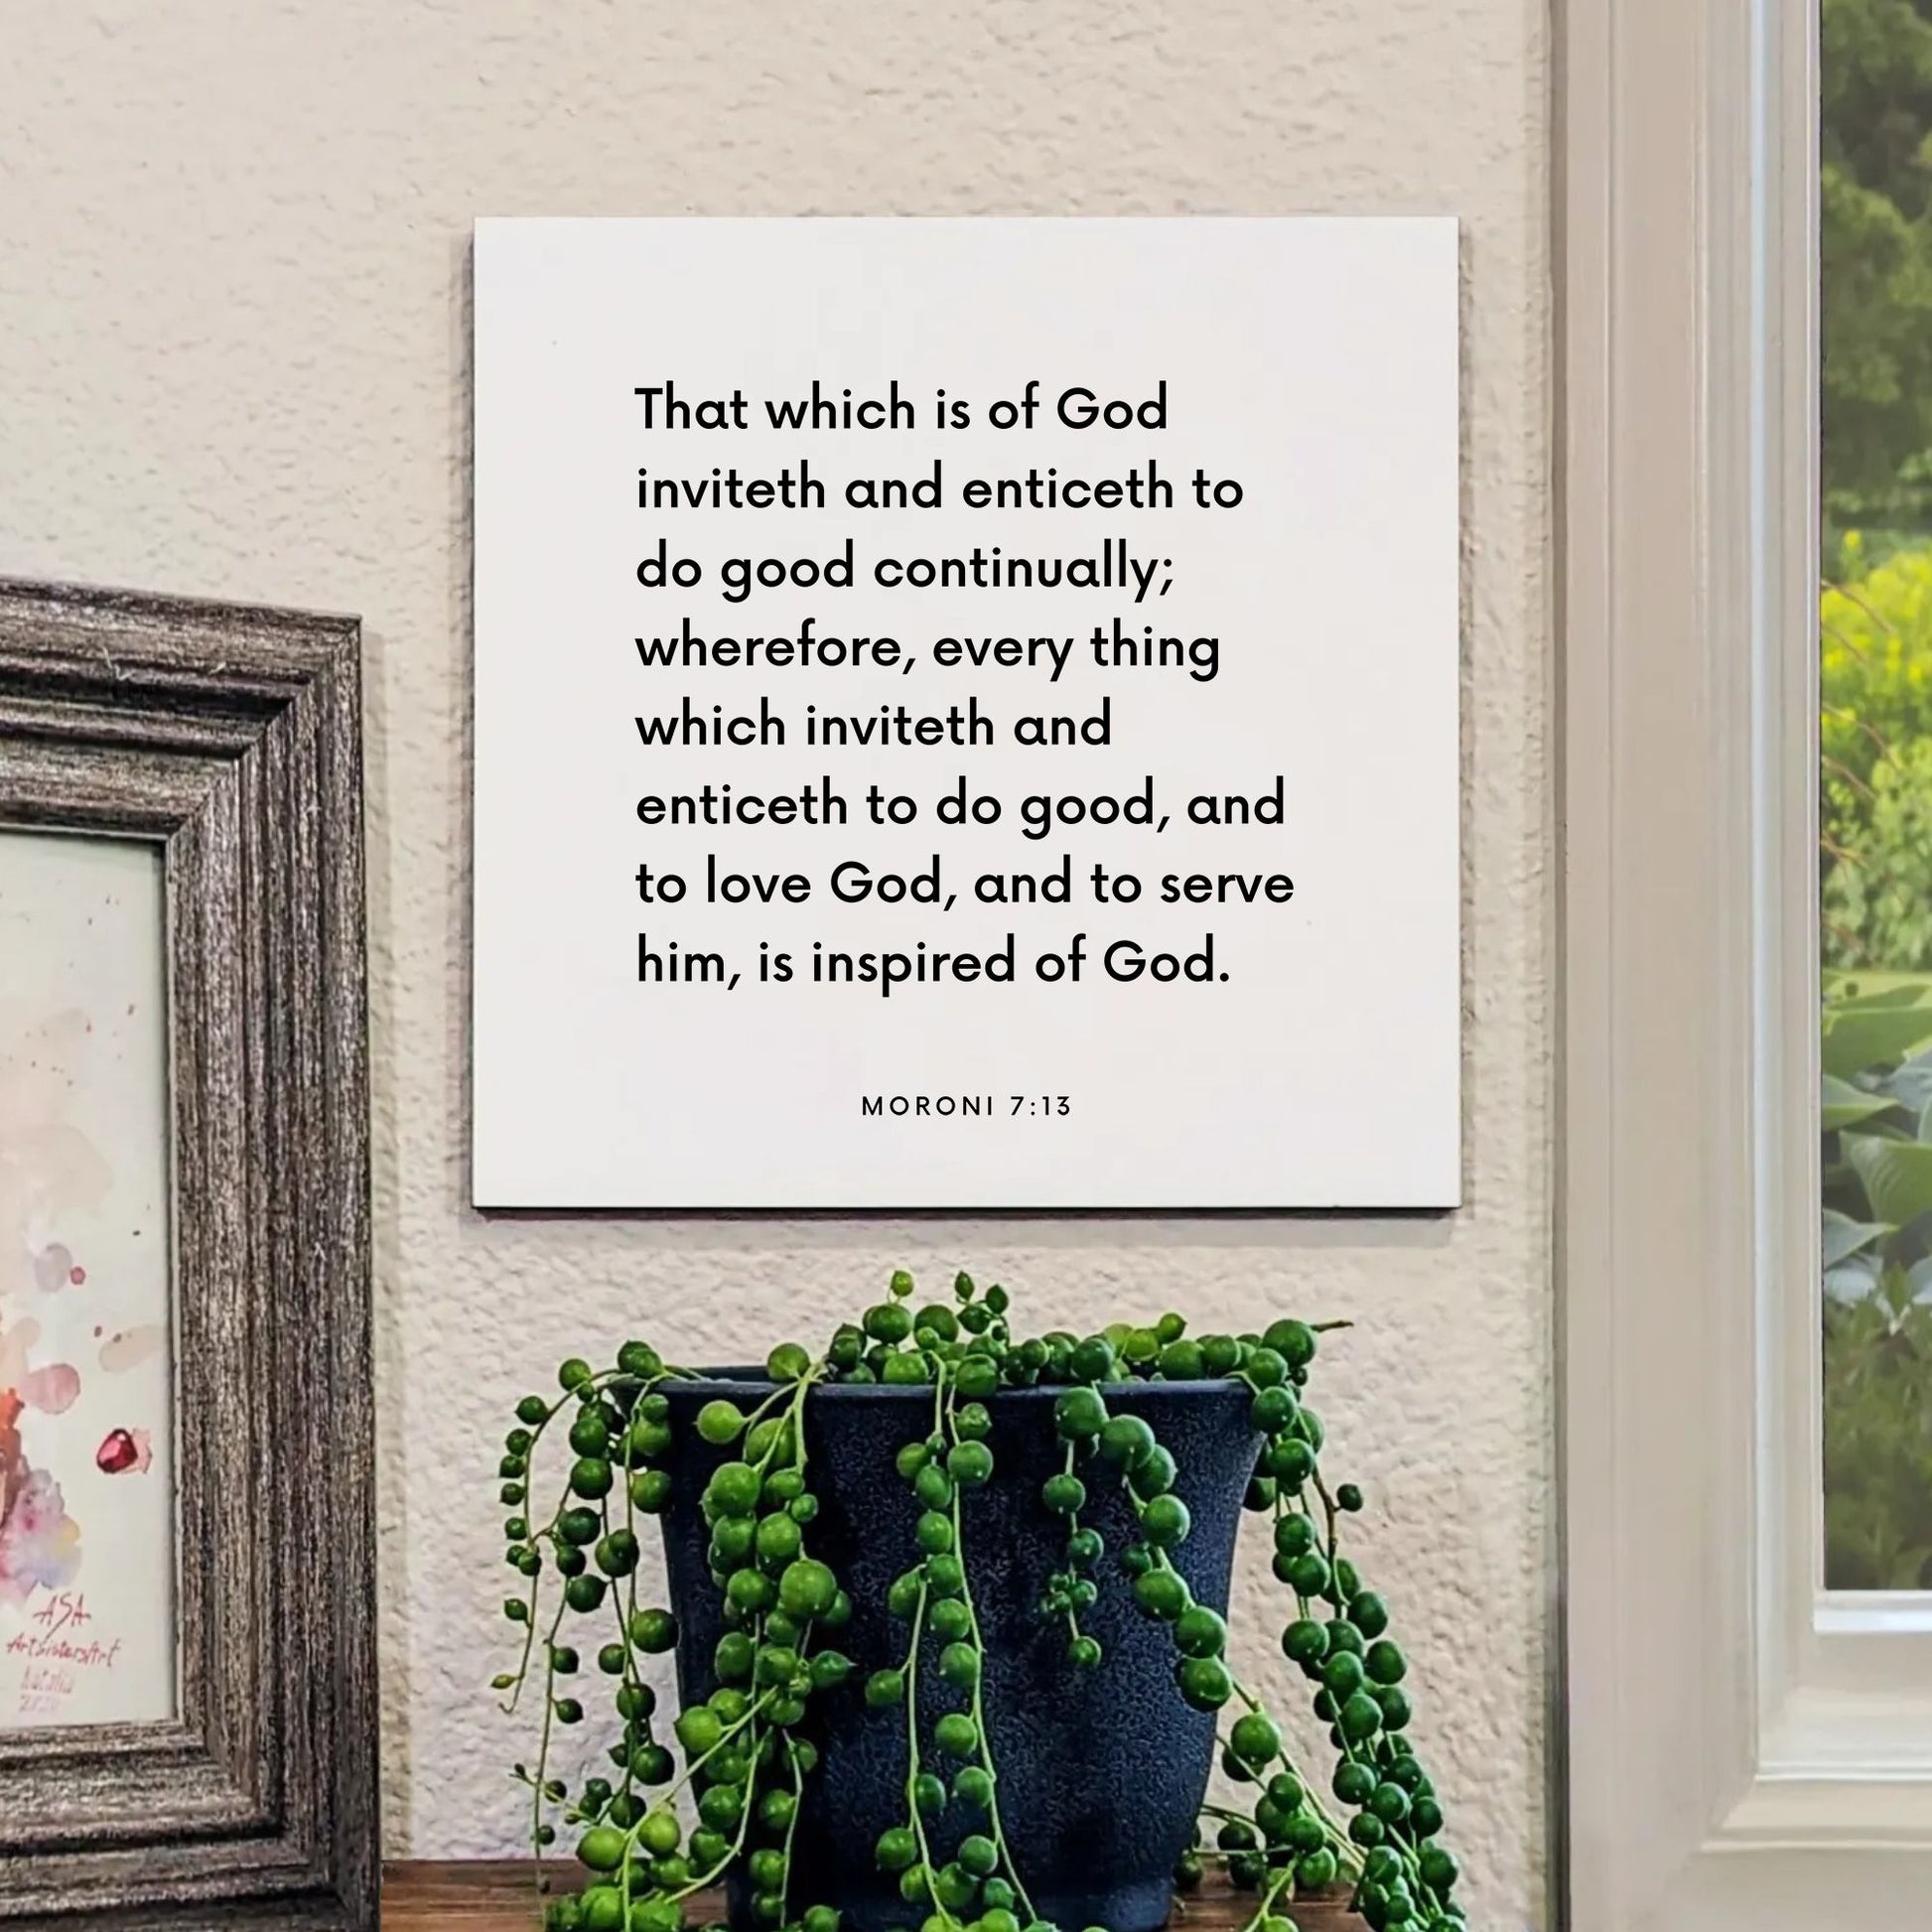 Window mouting of the scripture tile for Moroni 7:13 - "Every thing which inviteth and enticeth to do good"